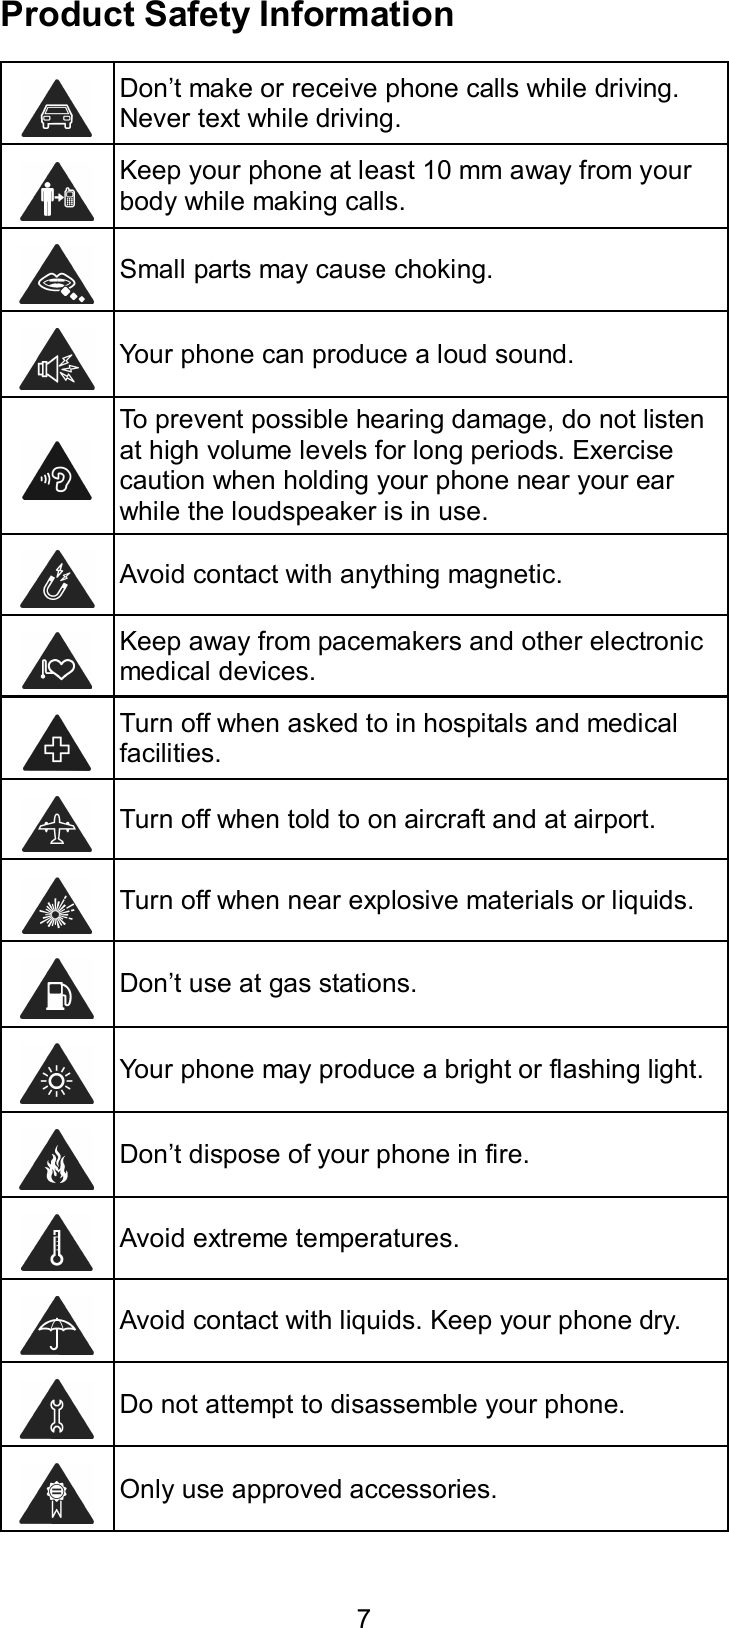  7 Product Safety Information  Don’t make or receive phone calls while driving. Never text while driving.  Keep your phone at least 10 mm away from your body while making calls.   Small parts may cause choking.  Your phone can produce a loud sound.  To prevent possible hearing damage, do not listen at high volume levels for long periods. Exercise caution when holding your phone near your ear while the loudspeaker is in use.  Avoid contact with anything magnetic.  Keep away from pacemakers and other electronic medical devices.  Turn off when asked to in hospitals and medical facilities.  Turn off when told to on aircraft and at airport.  Turn off when near explosive materials or liquids.  Don’t use at gas stations.  Your phone may produce a bright or flashing light.  Don’t dispose of your phone in fire.  Avoid extreme temperatures.  Avoid contact with liquids. Keep your phone dry.  Do not attempt to disassemble your phone.  Only use approved accessories. 